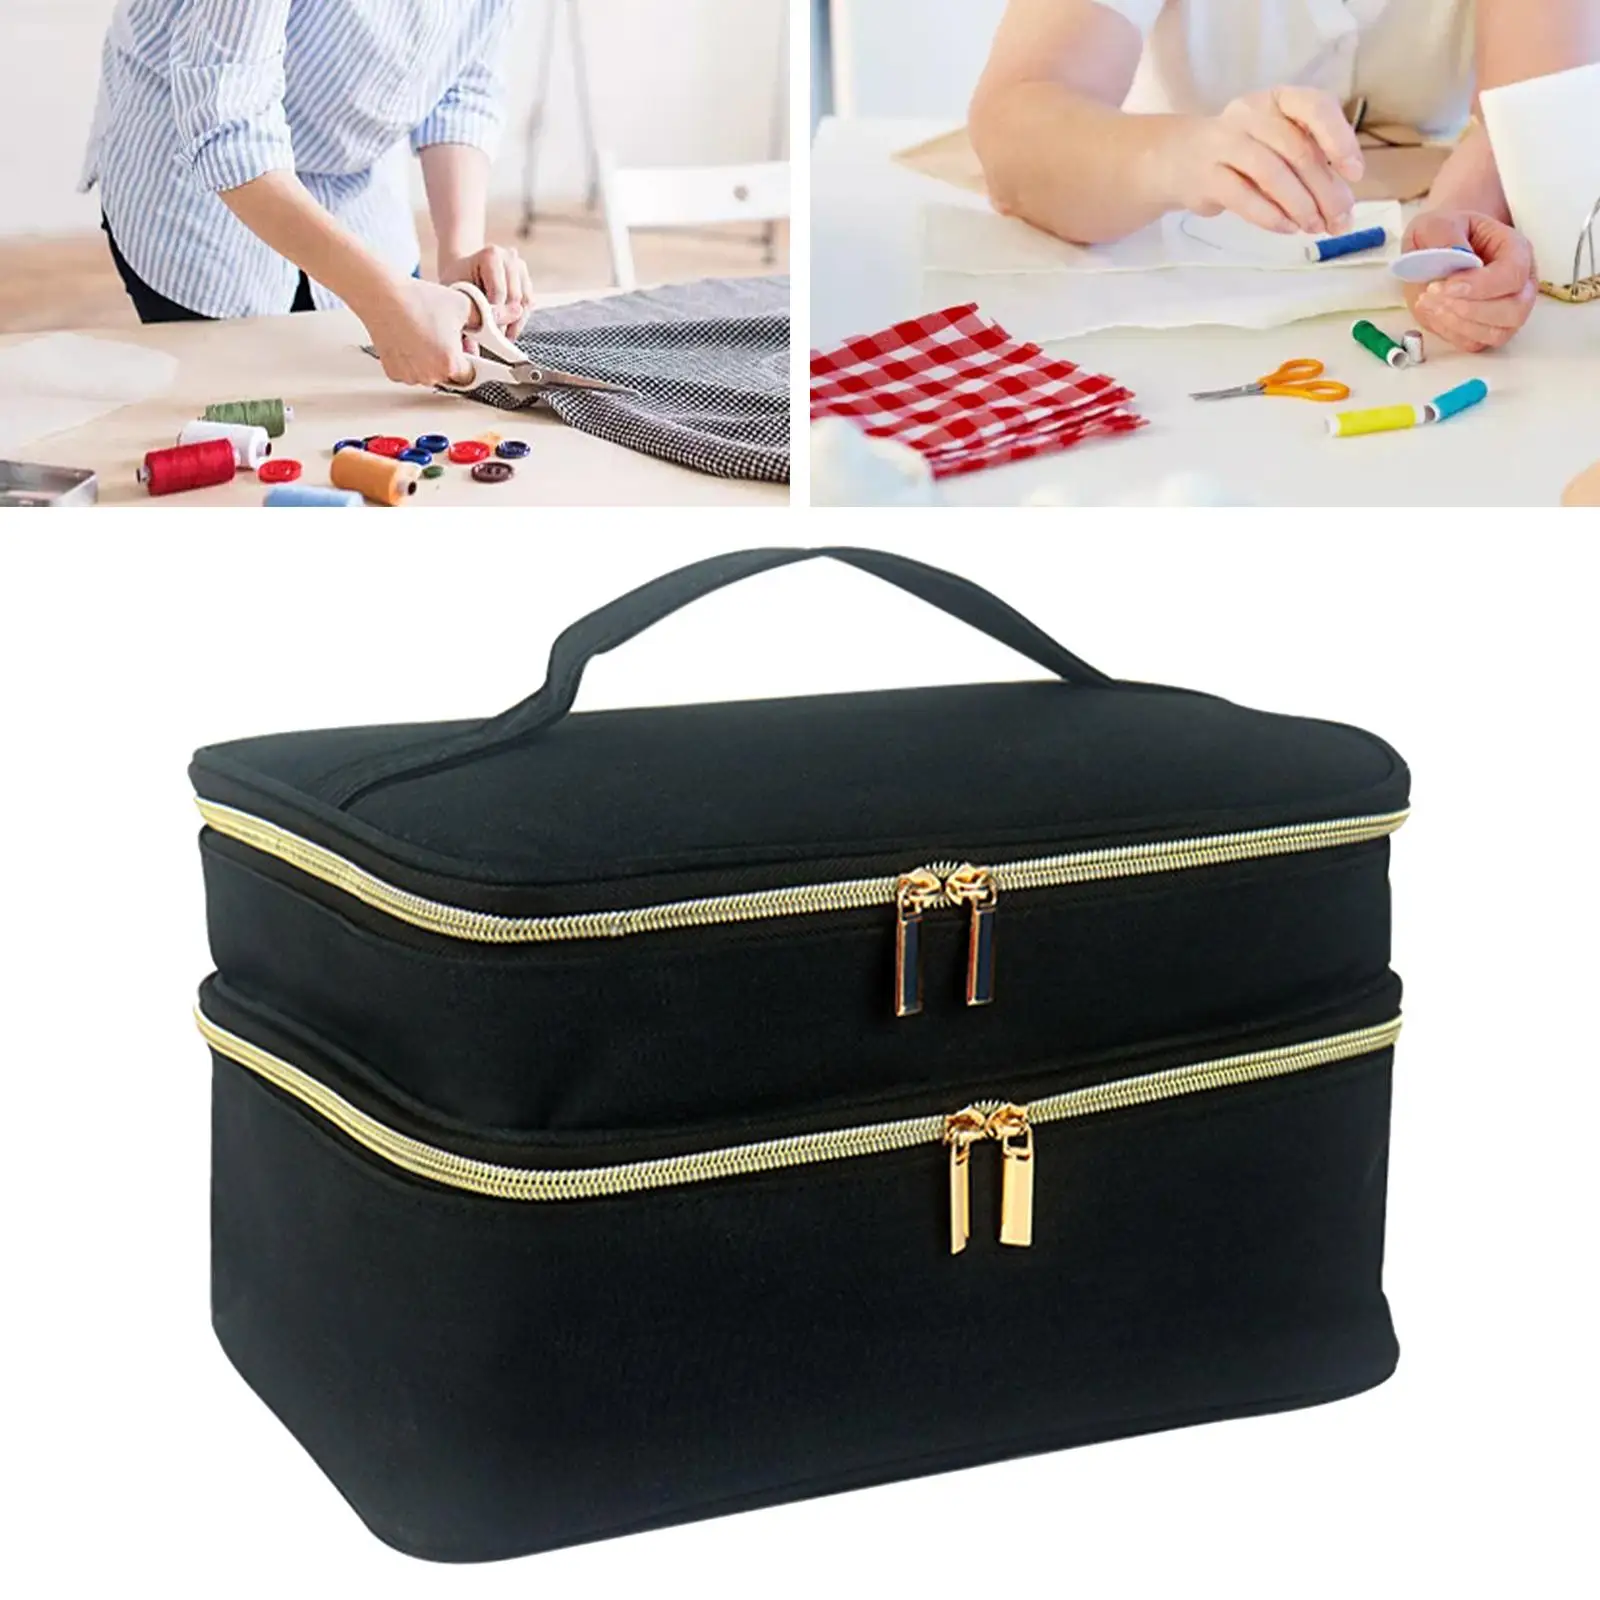 Sewing Accessories Storage Box Multipurpose Pouches Compartments for Scissors Office